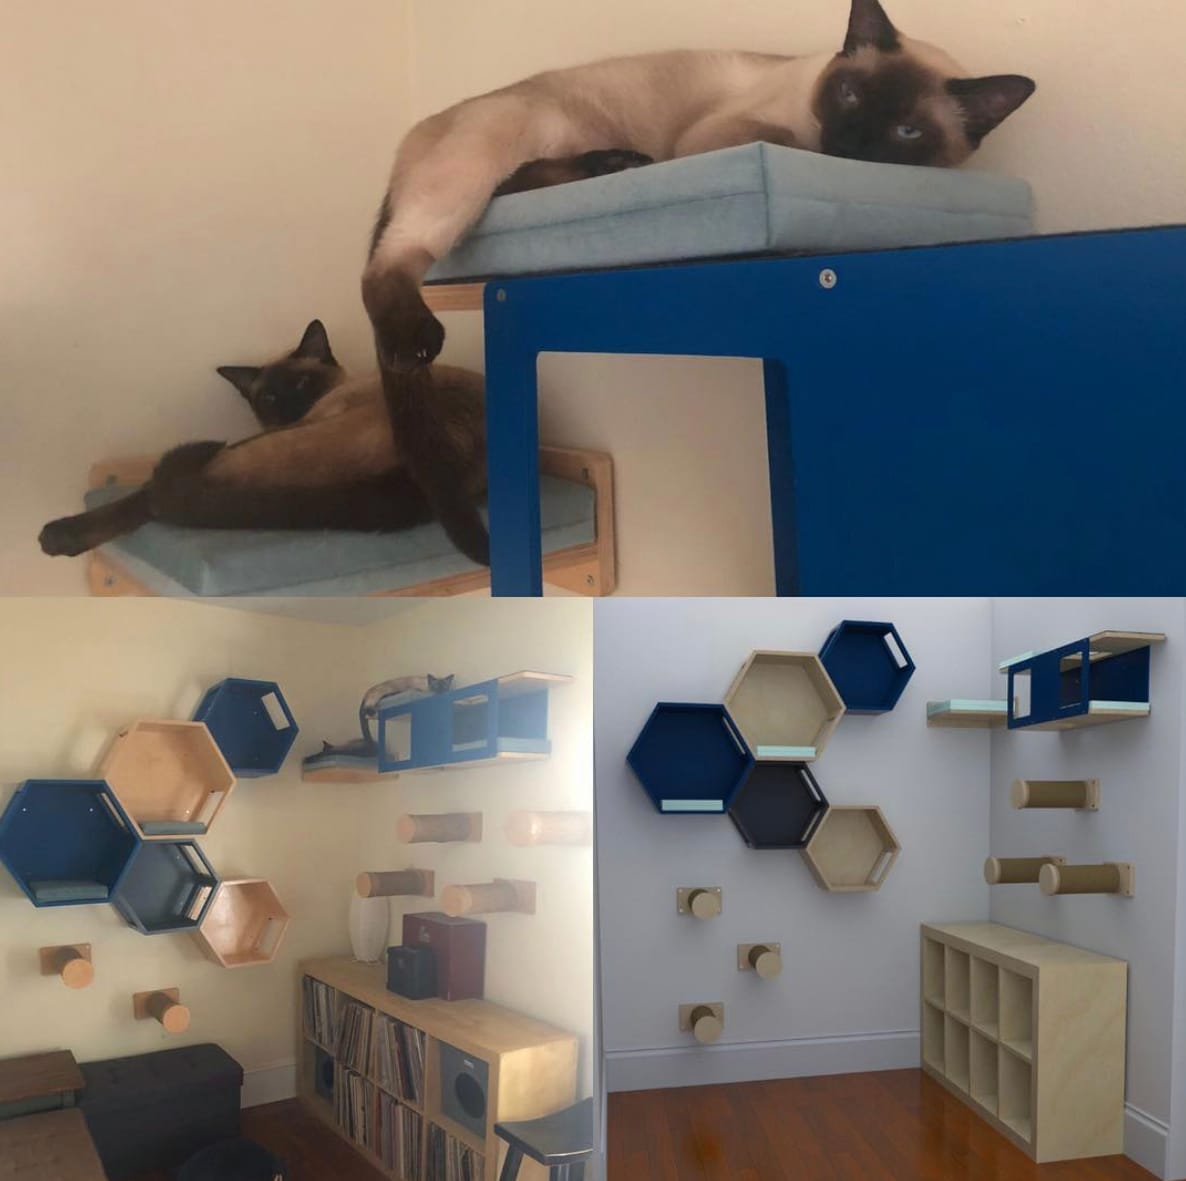 Climbing shelves for cats in cat rooms.